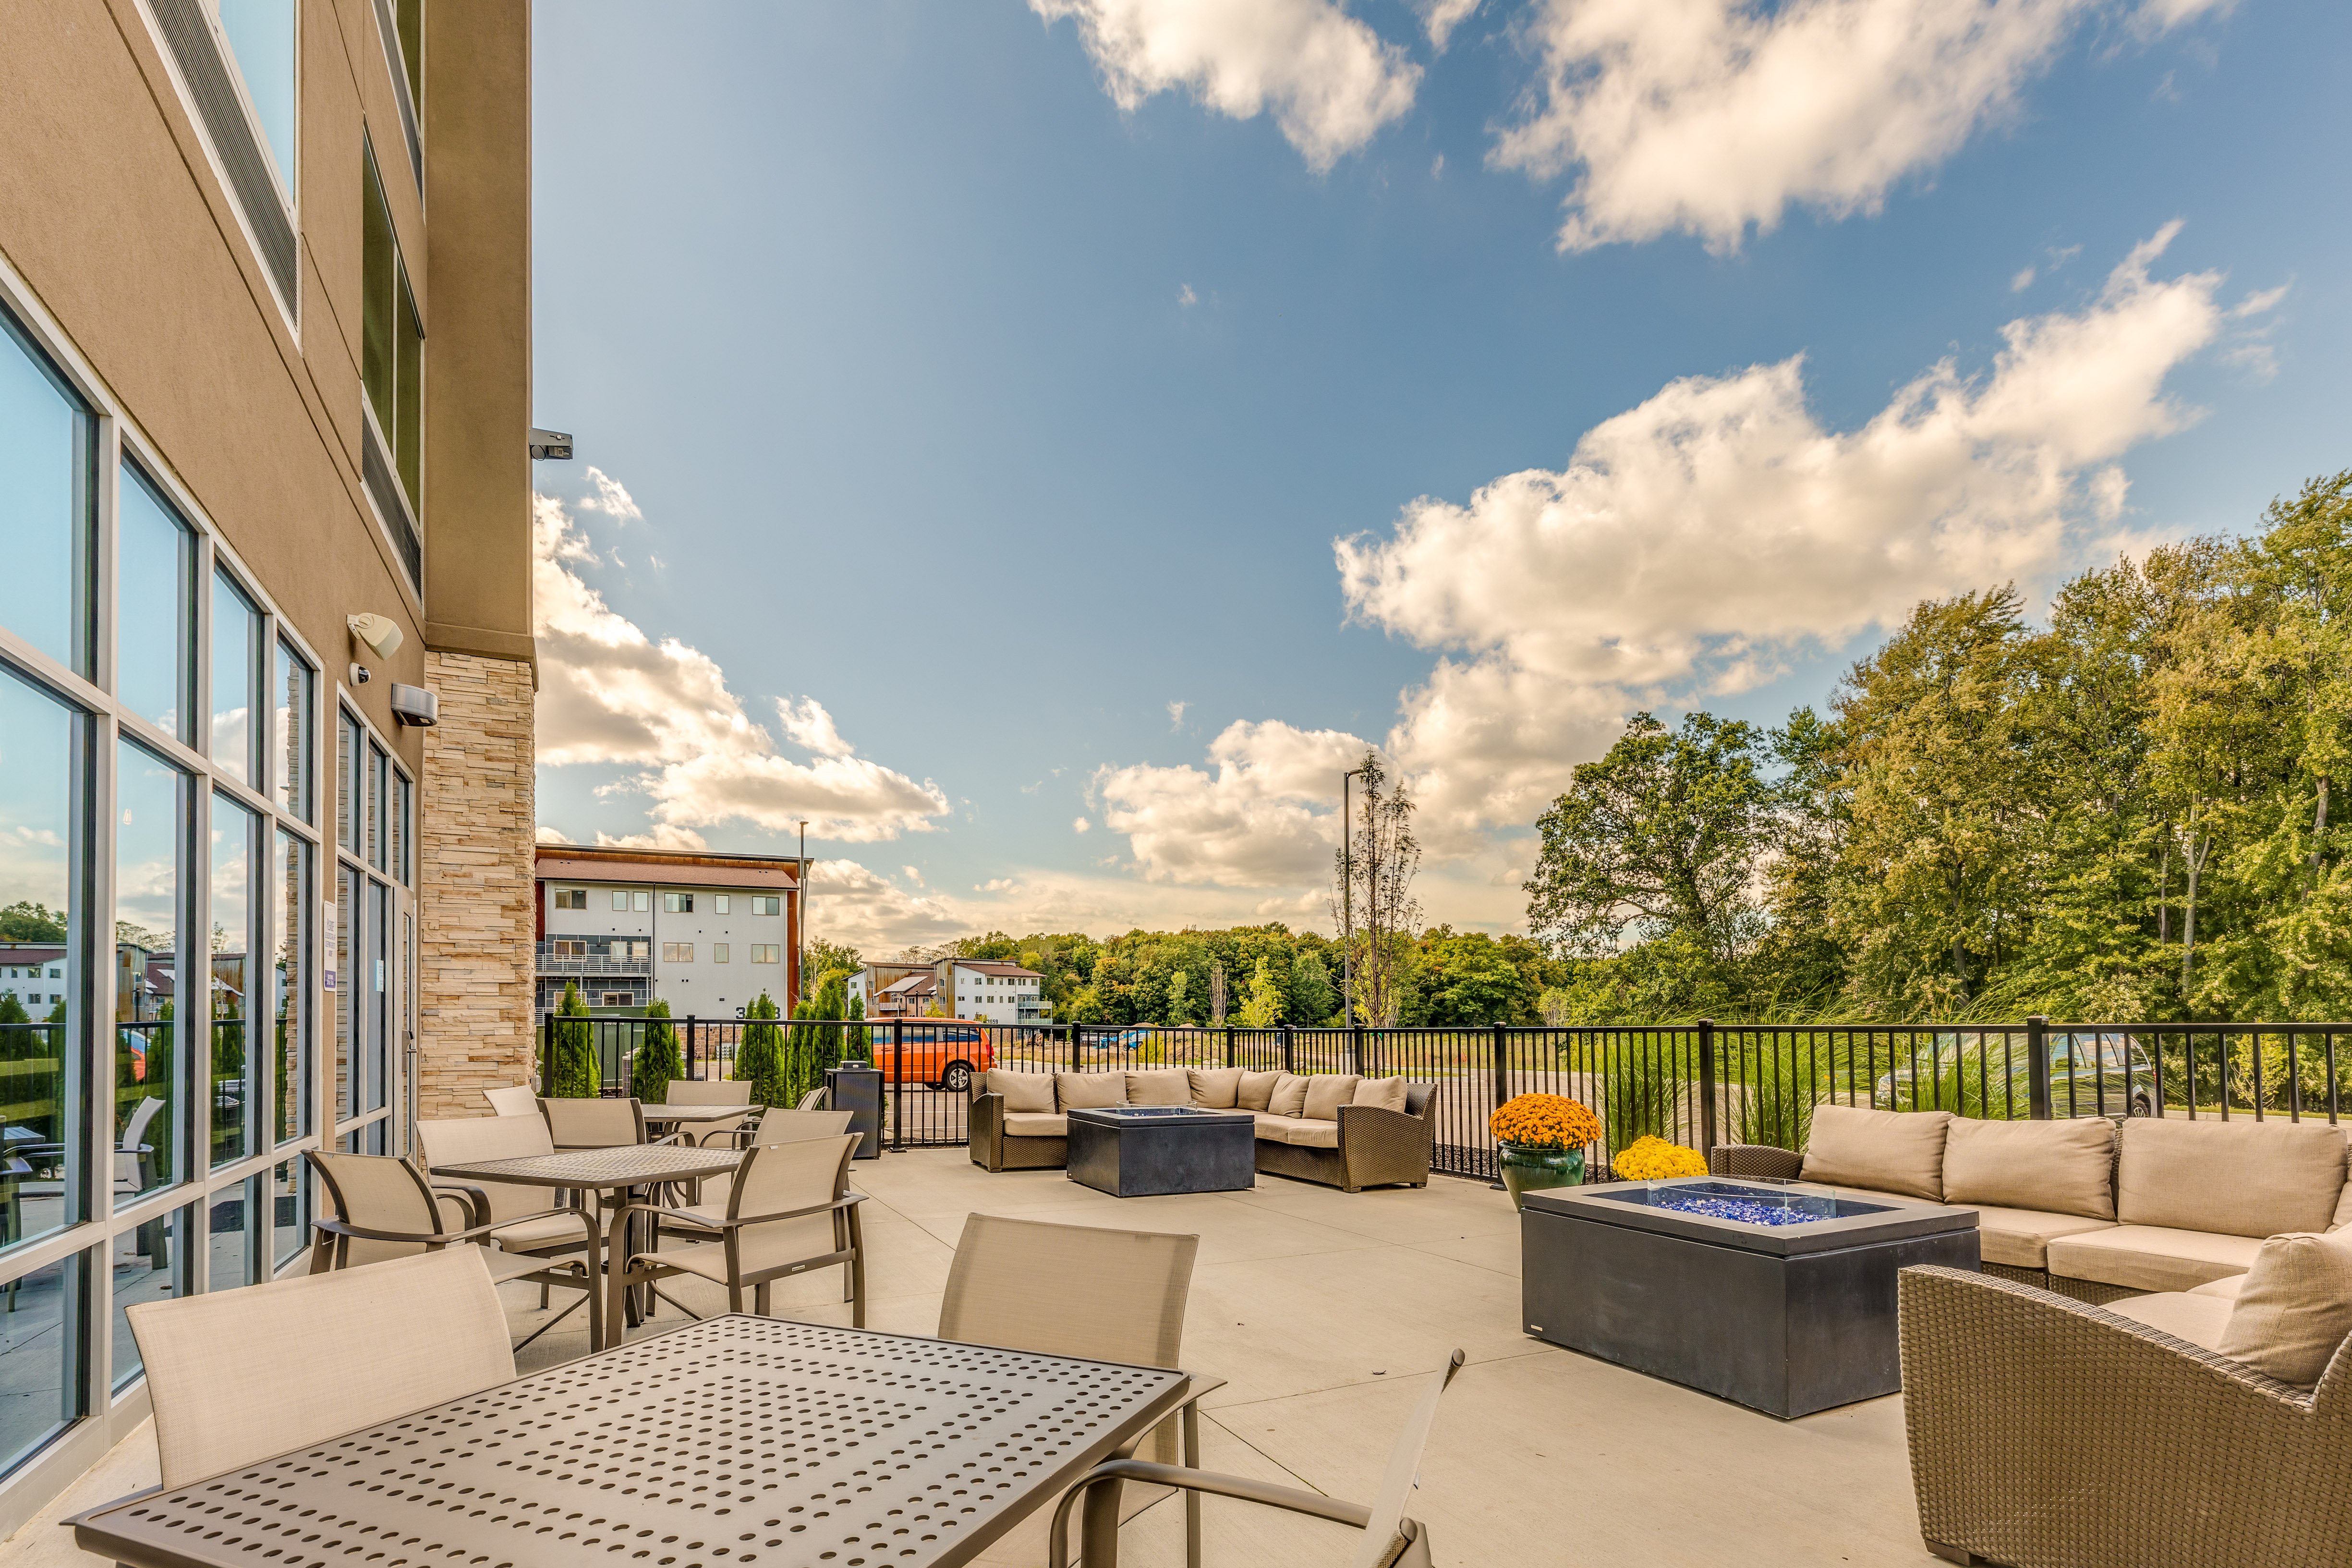 Relax in our Guest Patio, have a conversation & enjoy the fire pit